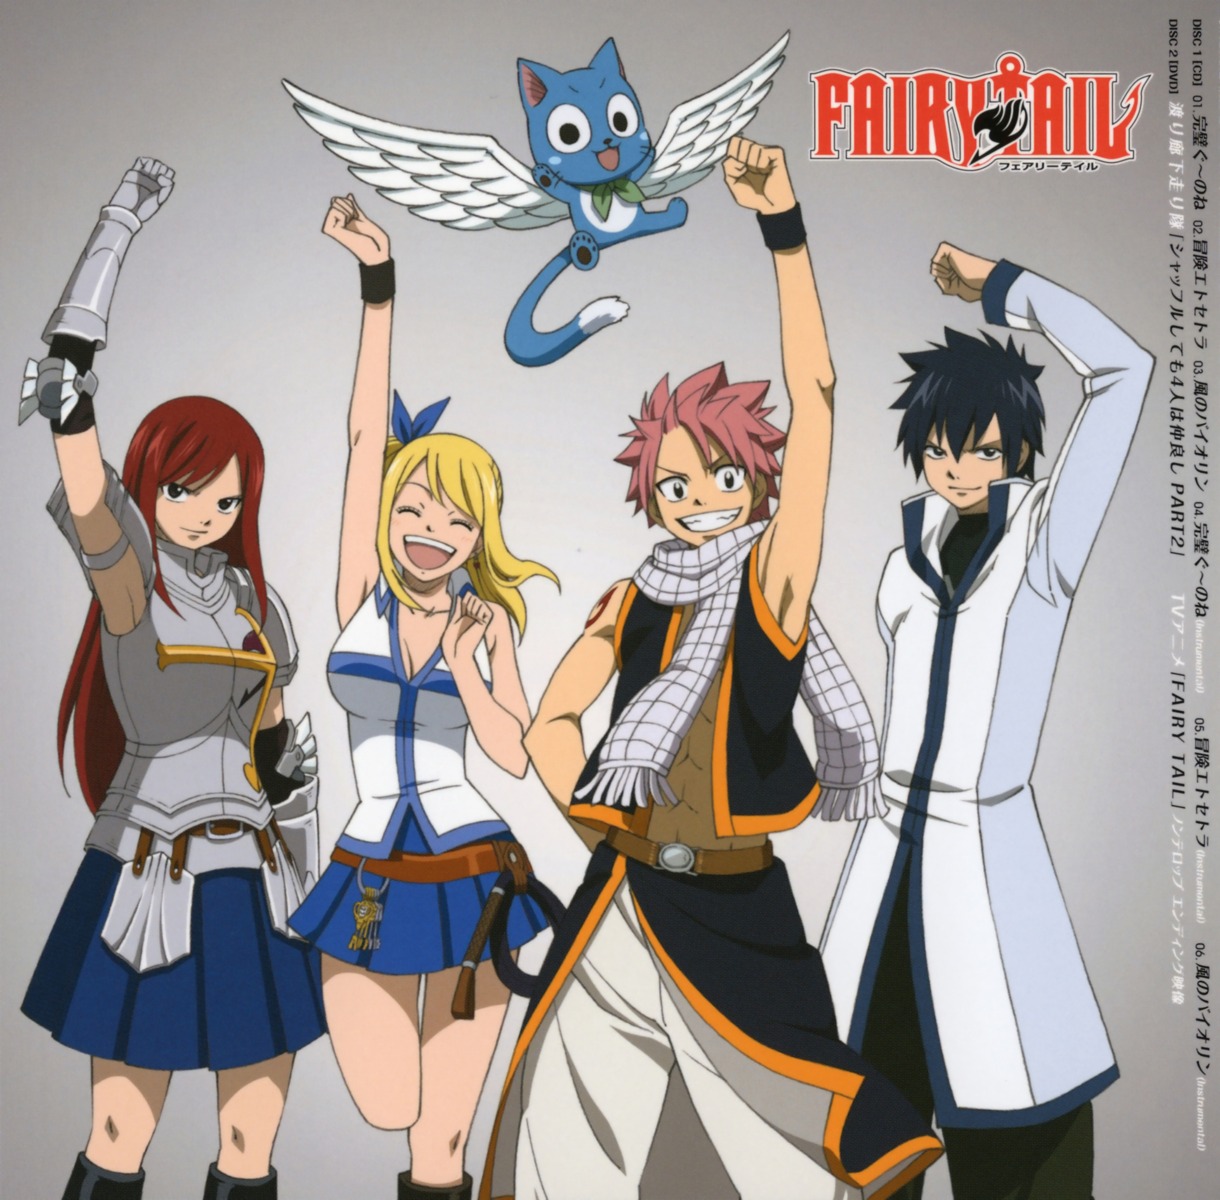 armor cleavage disc_cover erza_scarlet fairy_tail gray_fullbuster happy_(fairy_tail) lucy_heartfilia natsu_dragneel neko open_shirt tattoo wings